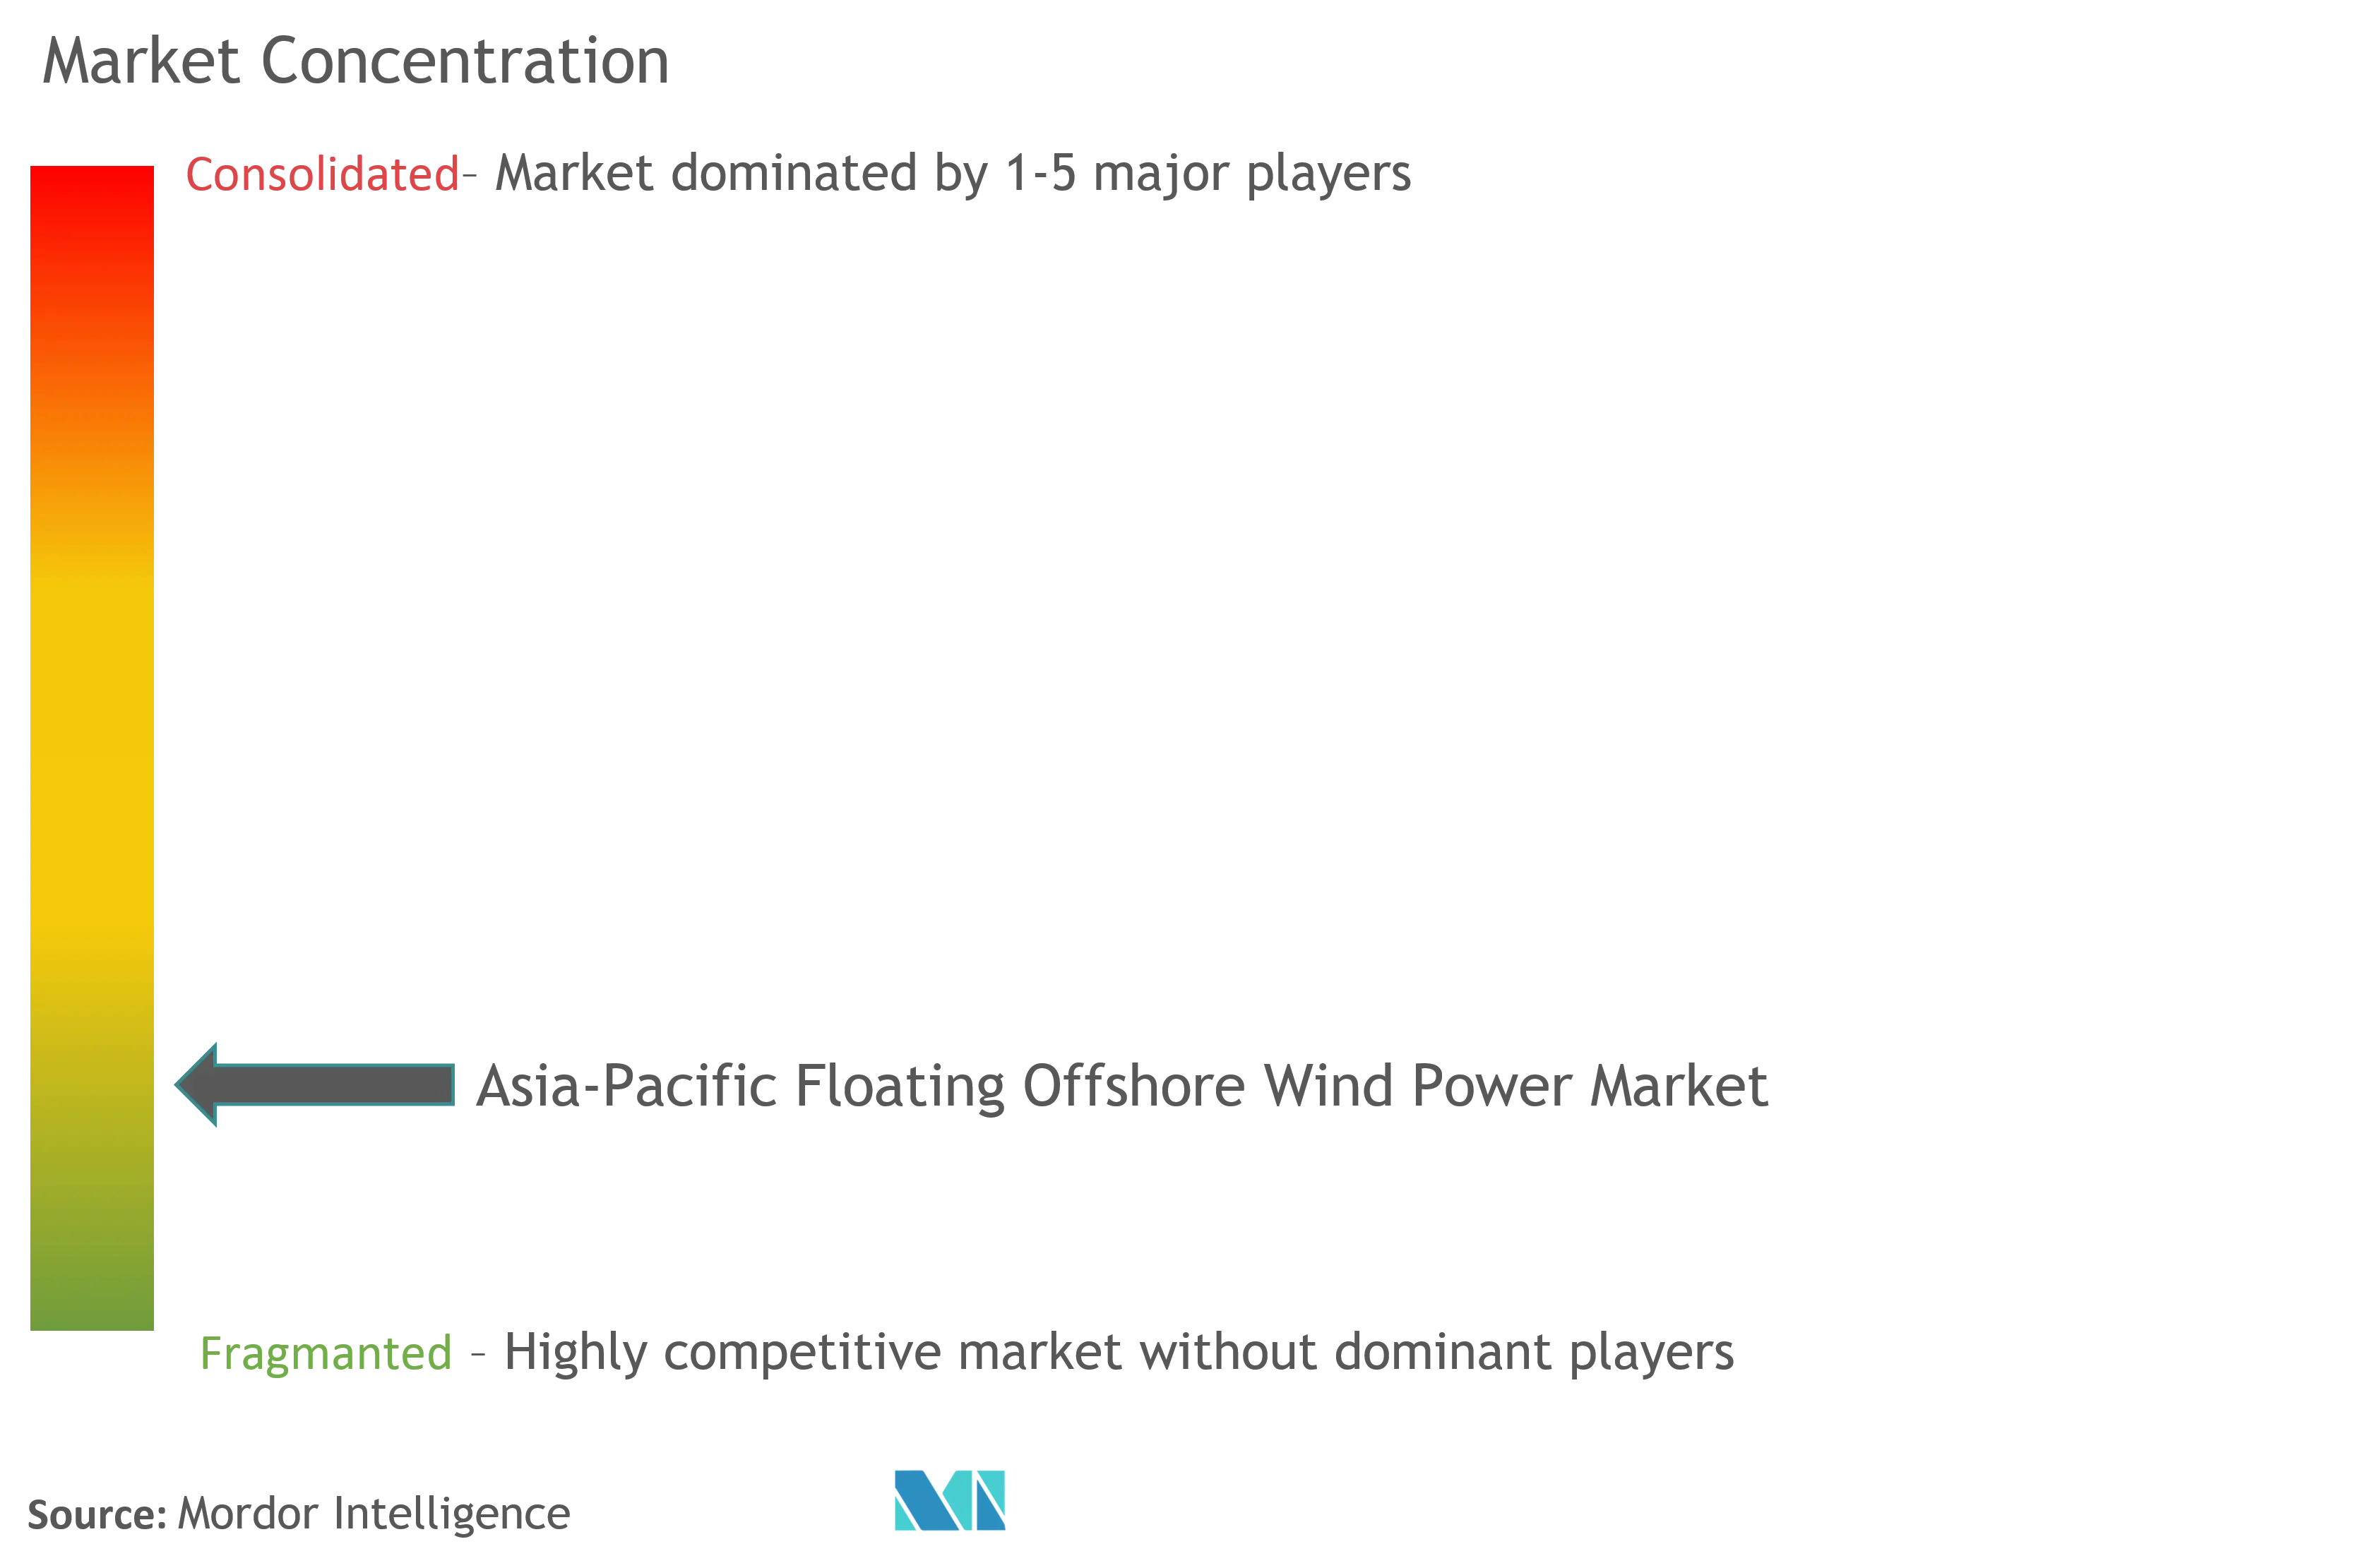 Asia-Pacific Floating Offshore Wind Power Market Concentration